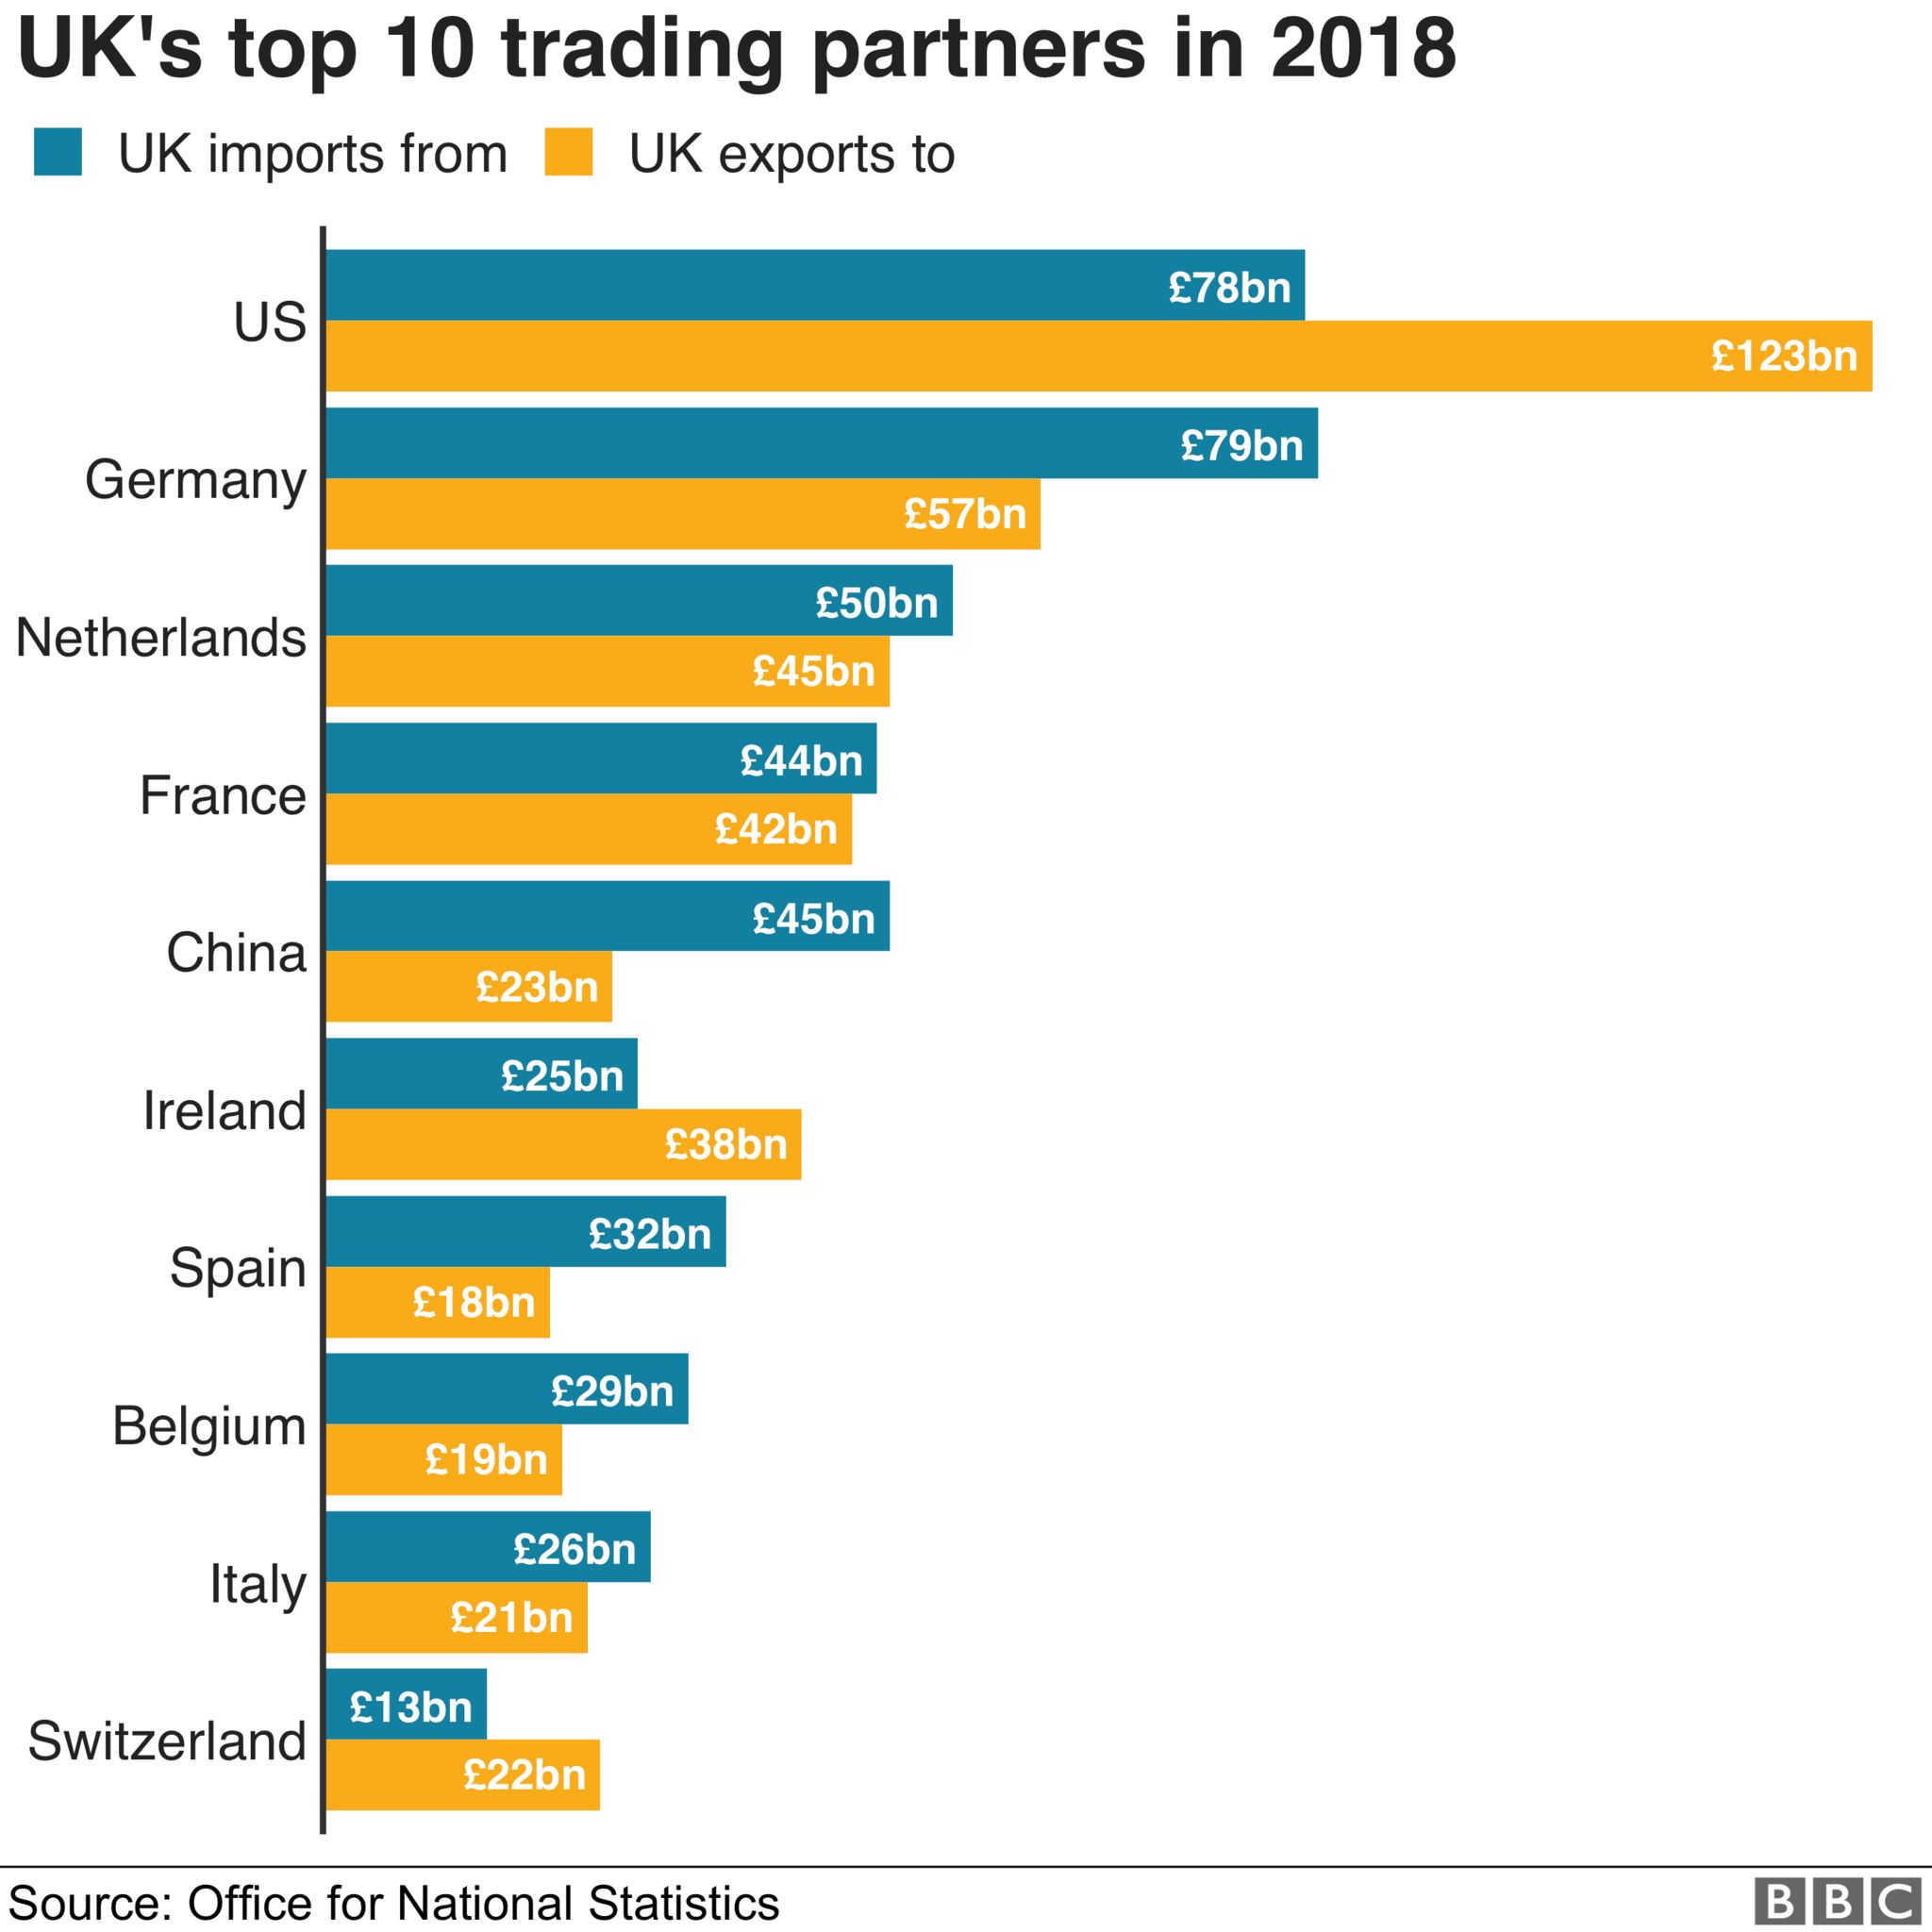 Bar chart showing the UK's top 10 trading partners